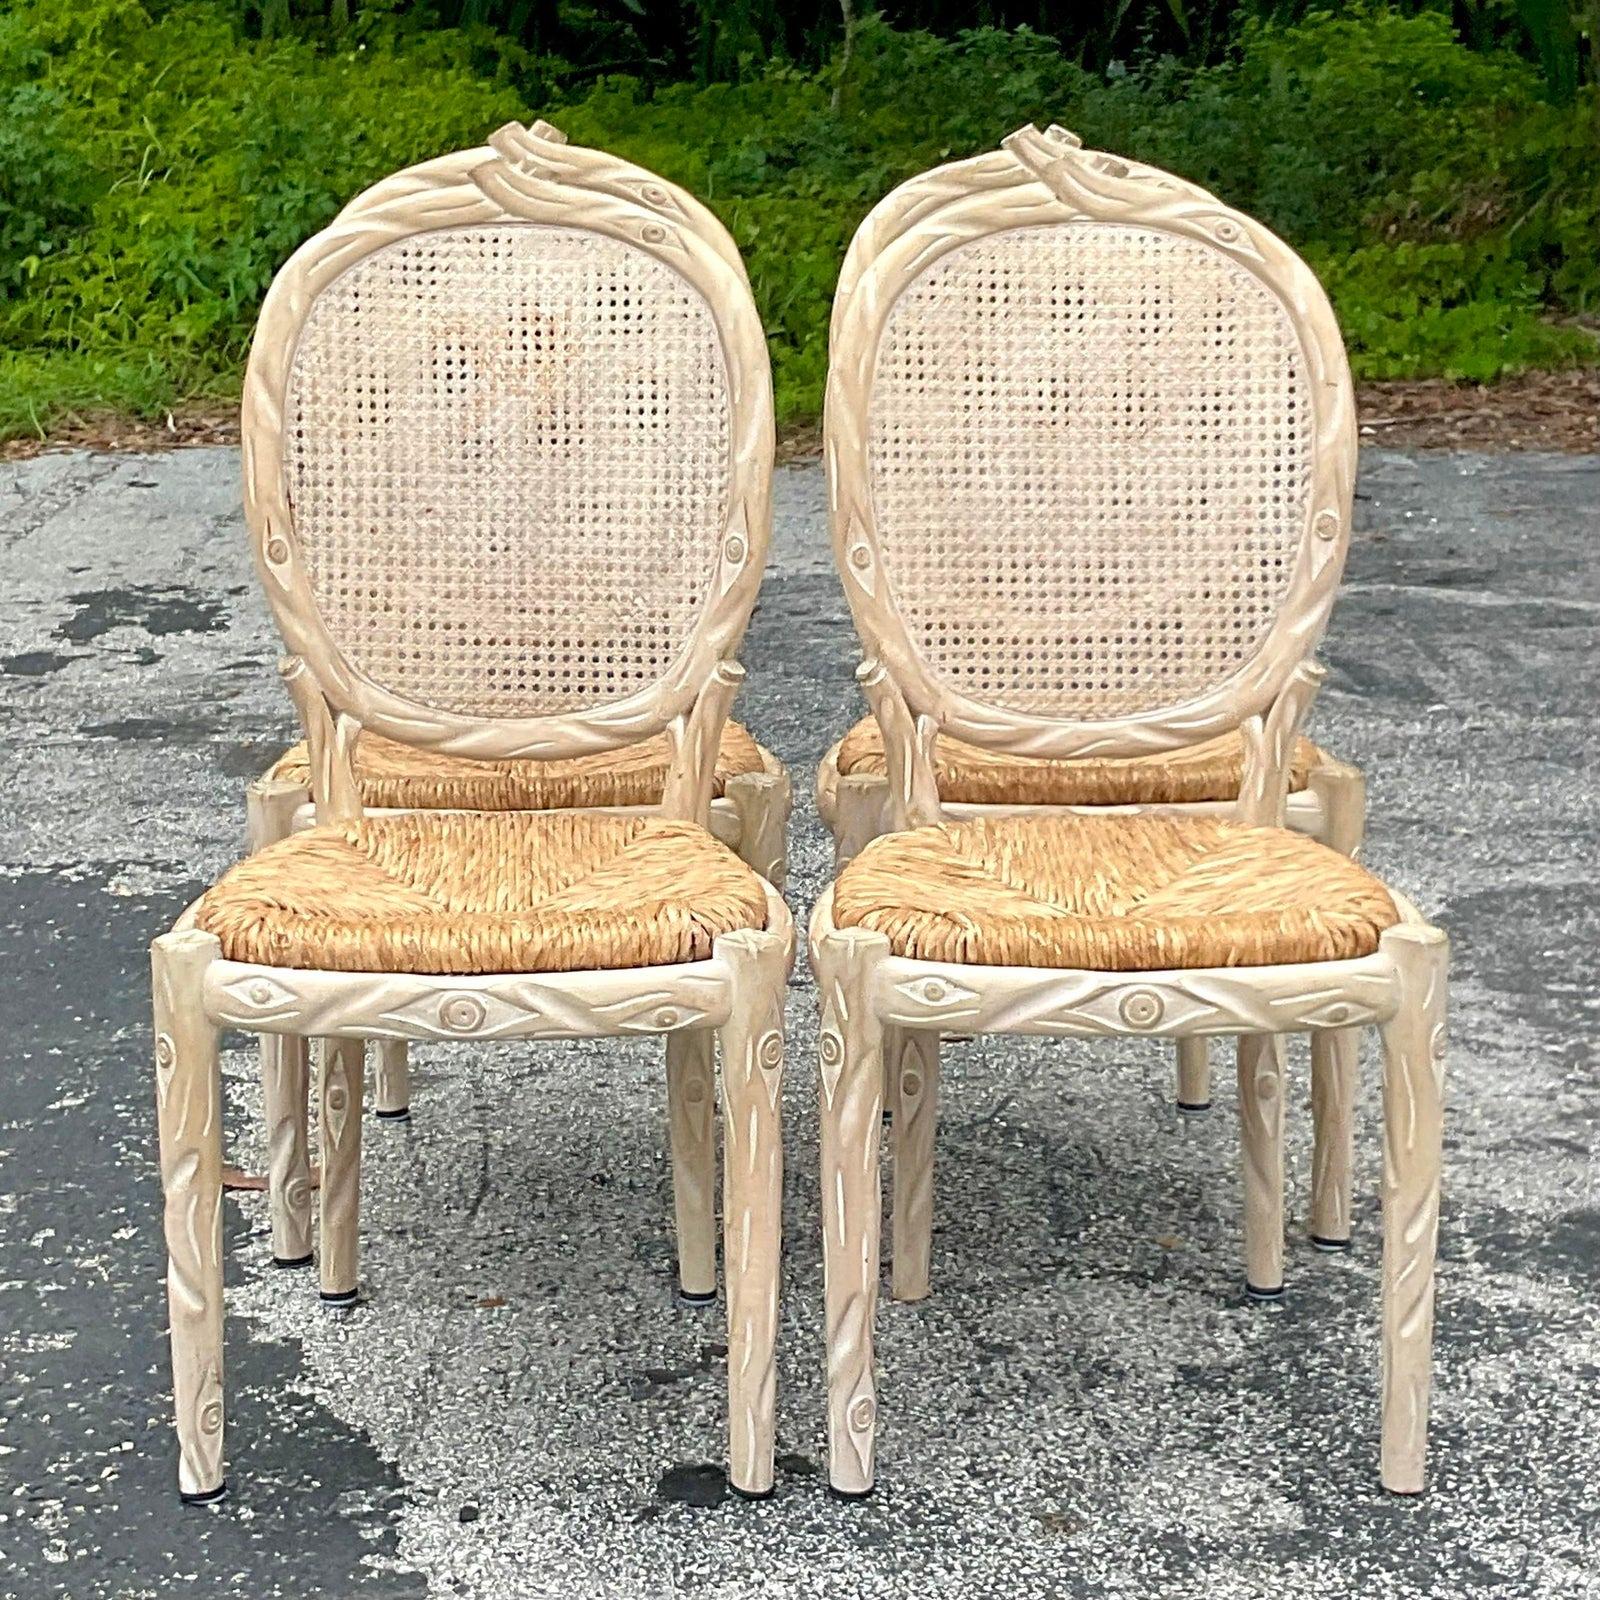 North American Late 20th Century Vintage Boho Carved Faux Bois Dining Chairs - Set of 4 For Sale